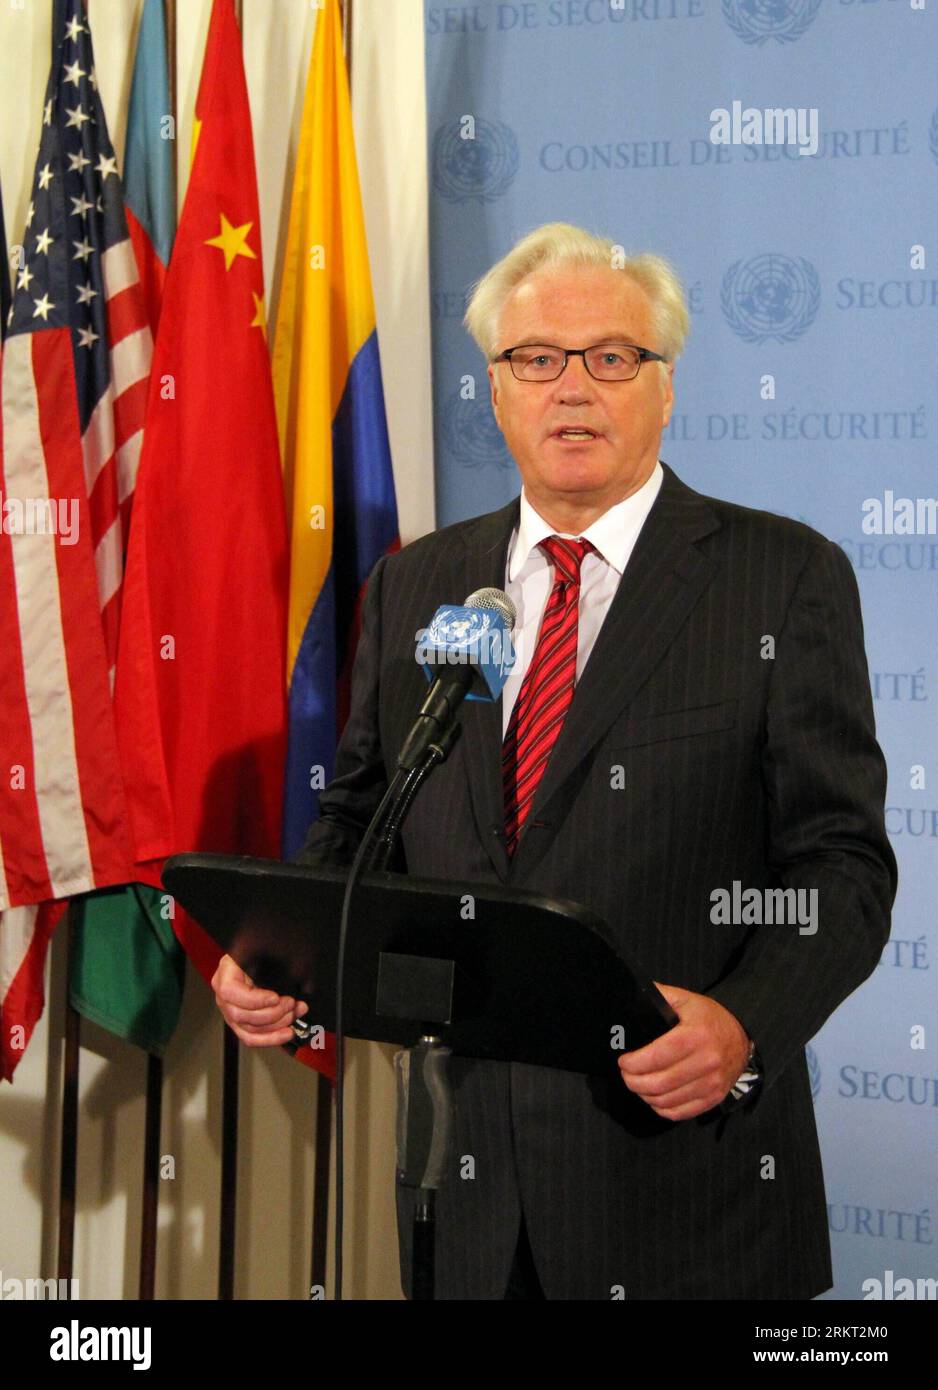 Bildnummer: 58356388  Datum: 16.08.2012  Copyright: imago/Xinhua (120816) -- NEW YORK, Aug. 16, 2012 (Xinhua) -- Vitaly Churkin, the Russian permanent representative to the UN, speaks to medias after a two-hour closed-door meeting at the UN headquarters in New York on August 16, 2012. The UN Security Council on Thursday said that it agreed to the establishment of a new political liaison office in the Syrian capital Damascus to back the efforts of the UN and the Arab League to bring an early end to the 17-month crisis in Syria. (Xinhua/Lin Qiong) UN-NEW YORK-POLITICS-SYRIA PUBLICATIONxNOTxINxCH Stock Photo